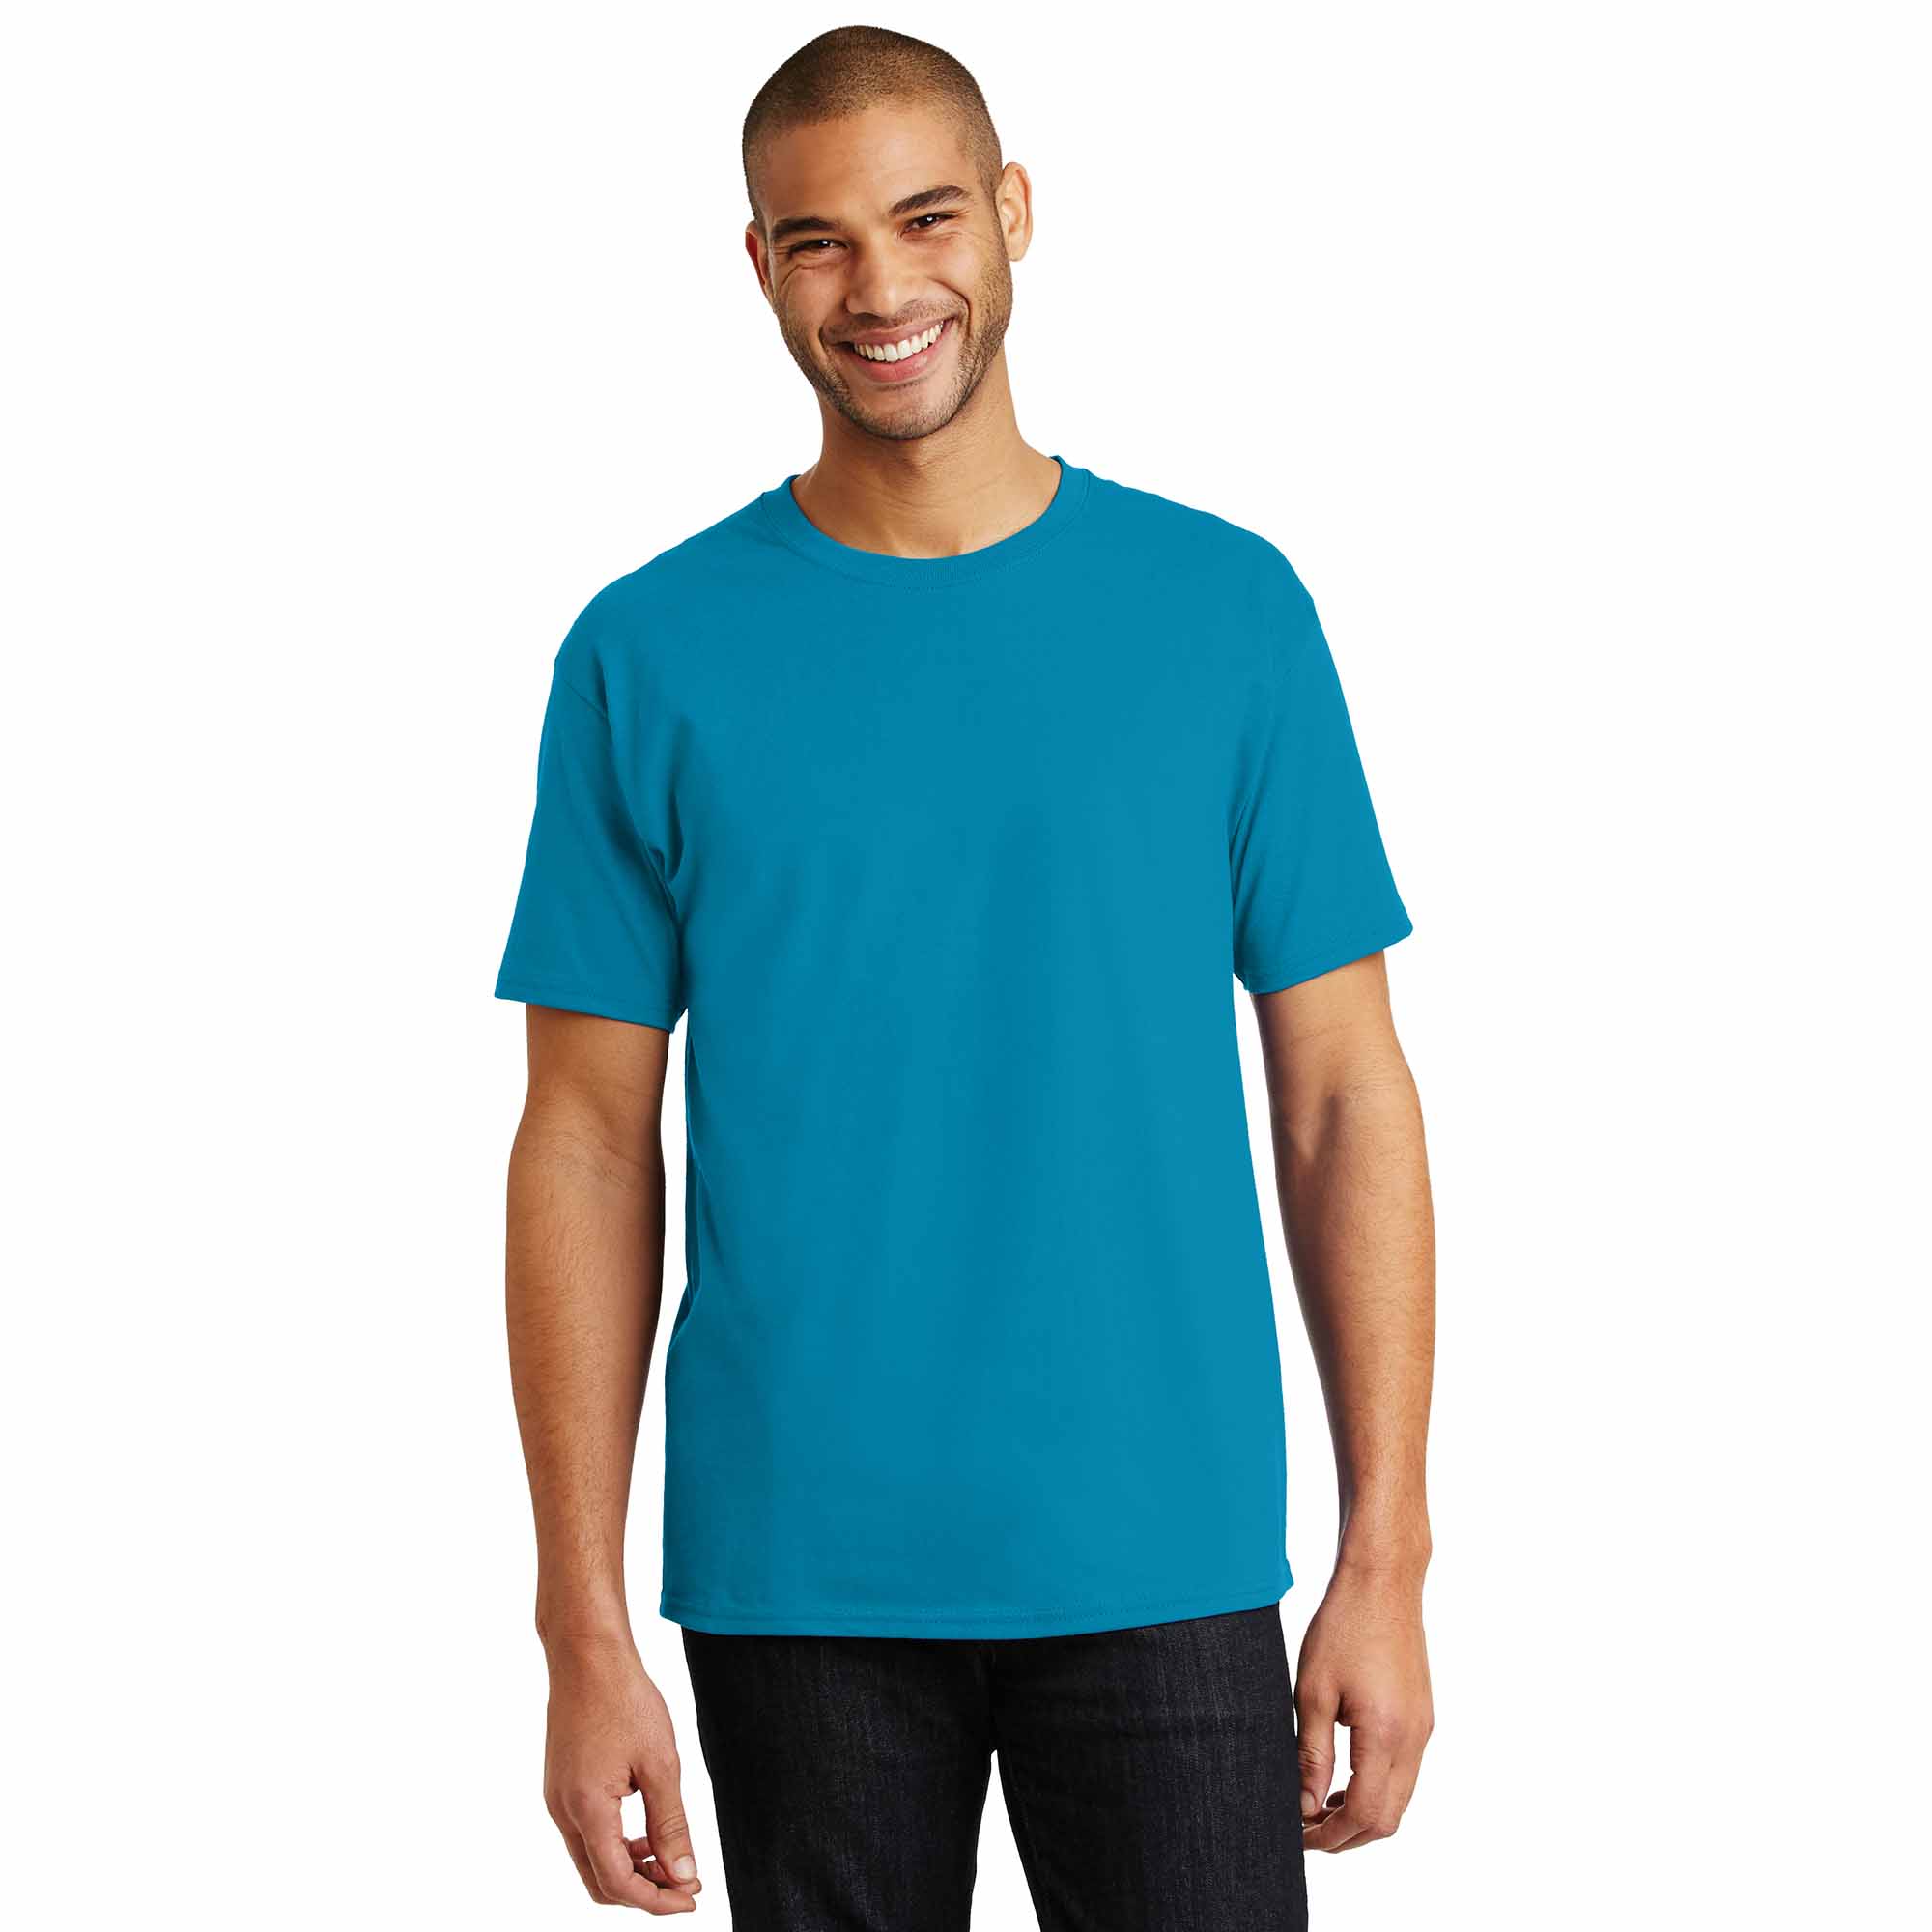 Hanes 5250 Authentic 100% Cotton T-Shirt - Teal | Full Source